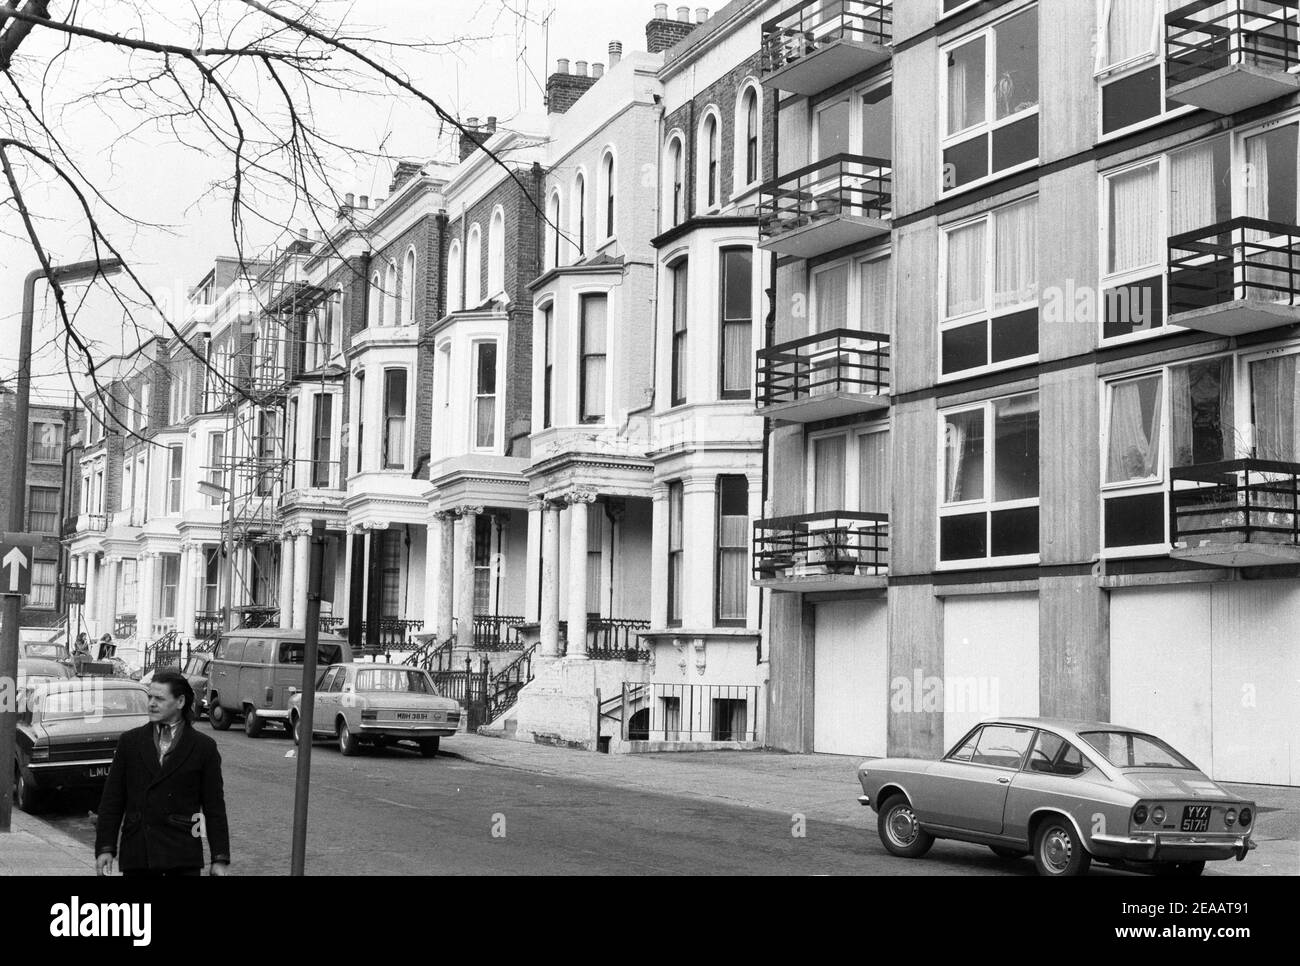 UK, West London, Notting Hill, 1973. Rundown & dilapidated large four-story houses are starting to be restored and redecorated. Near No.2 Powis Gardens. Talbot Tabernacle side entrance sign at the far end of the road by No.9 & 10. To the right are garages of the modern flats of Powis Court. Stock Photo